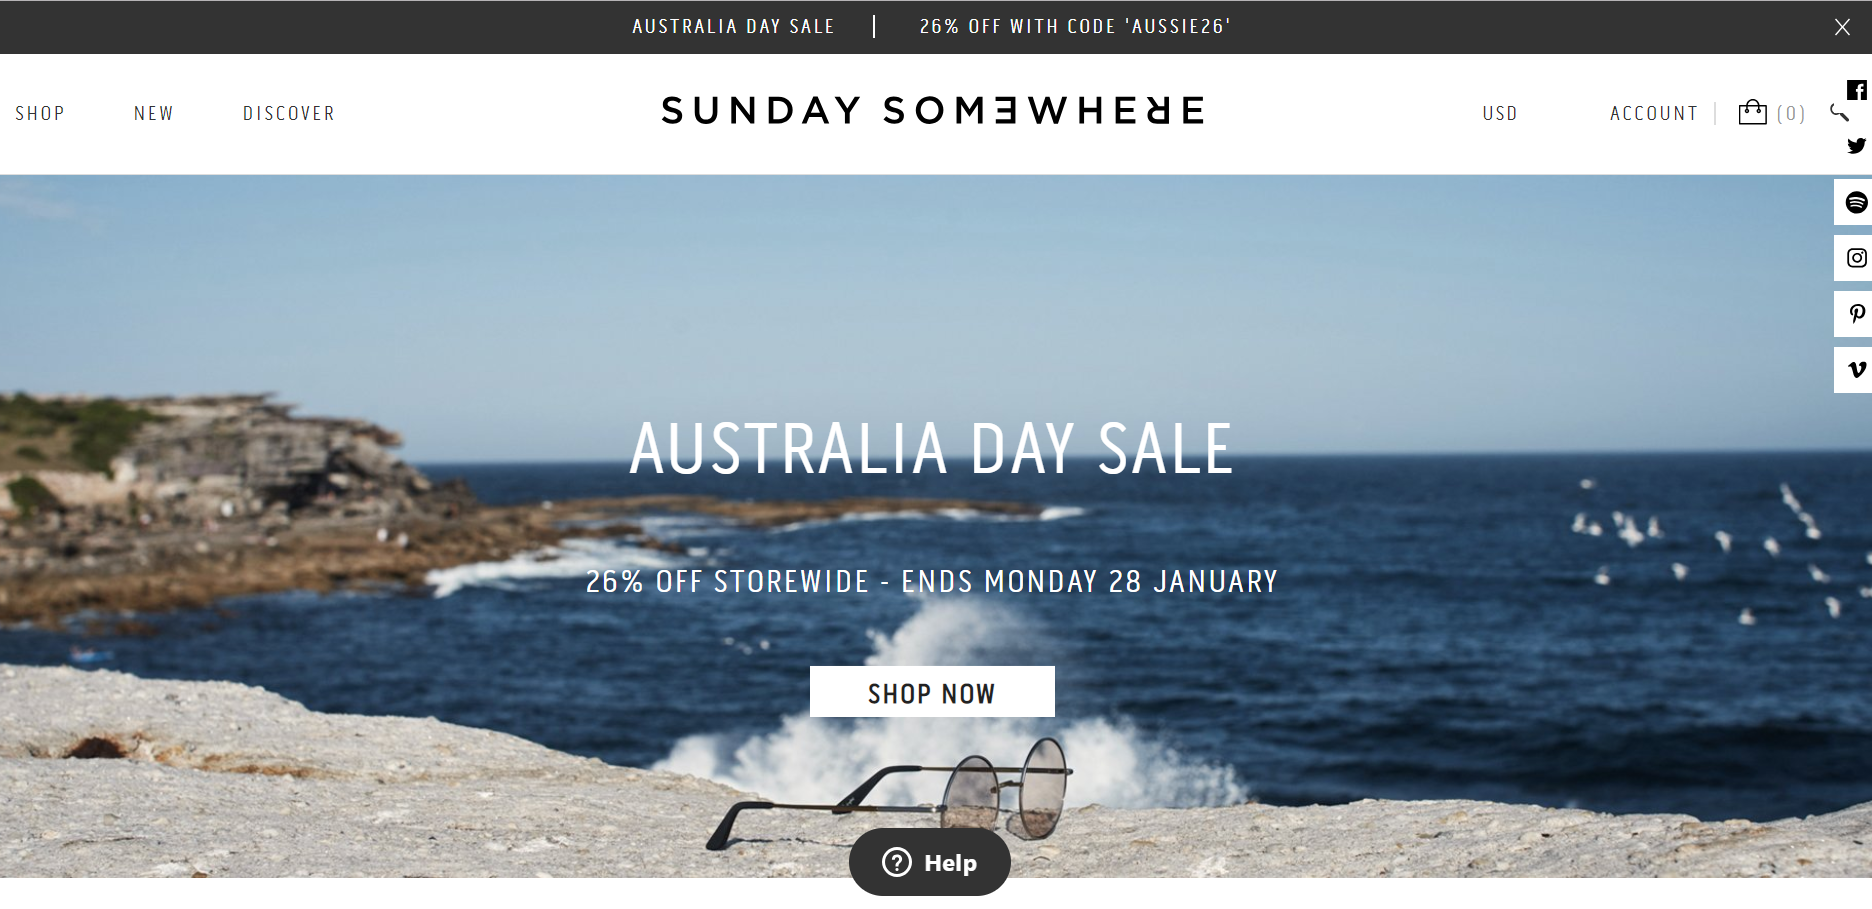 A screenshot from Sunday Somwhere's online store showing an example of a seasonal ecommerce promotion for Australia Day.